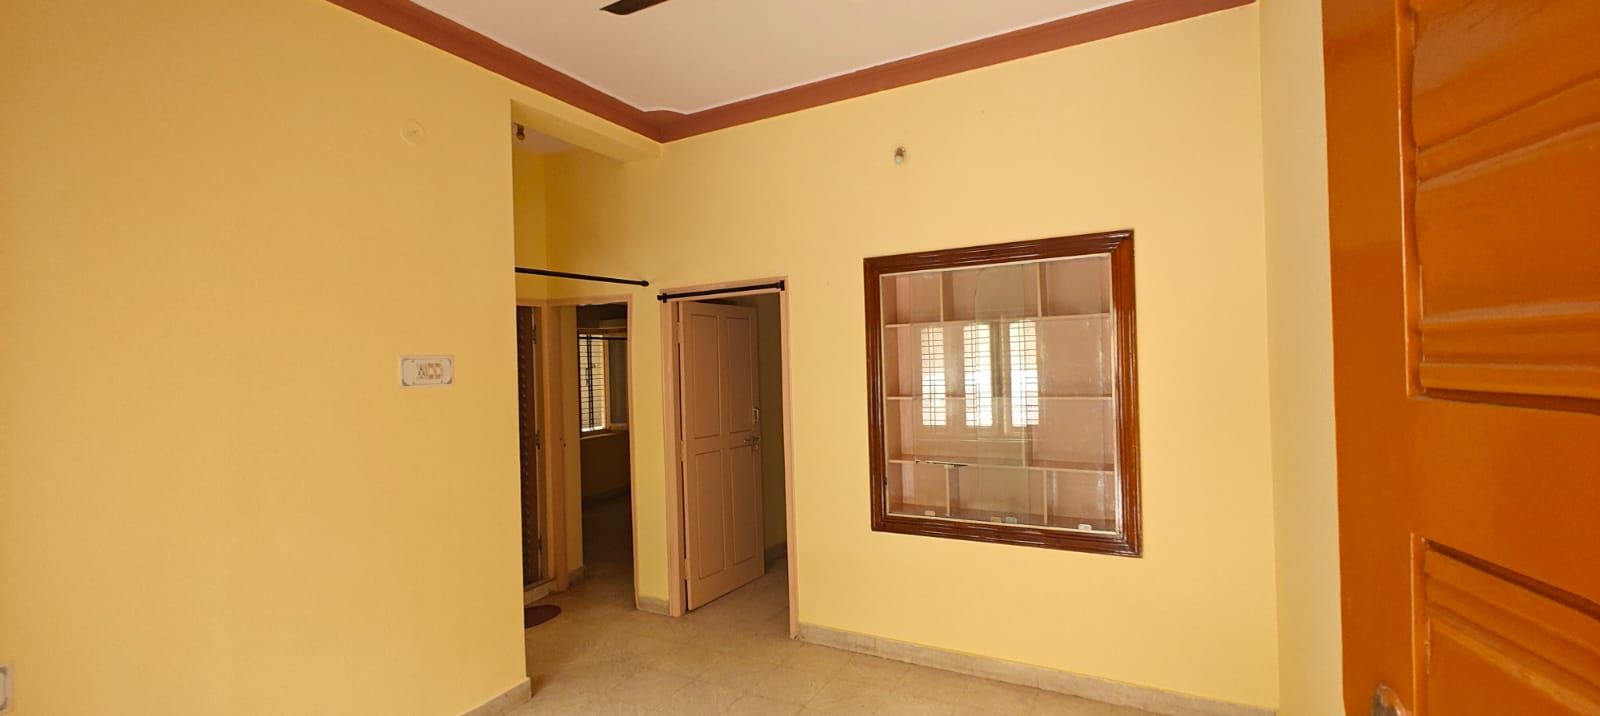 1 BHK Independent House for Lease Only at JAML2 - 4533 in Babusapalya